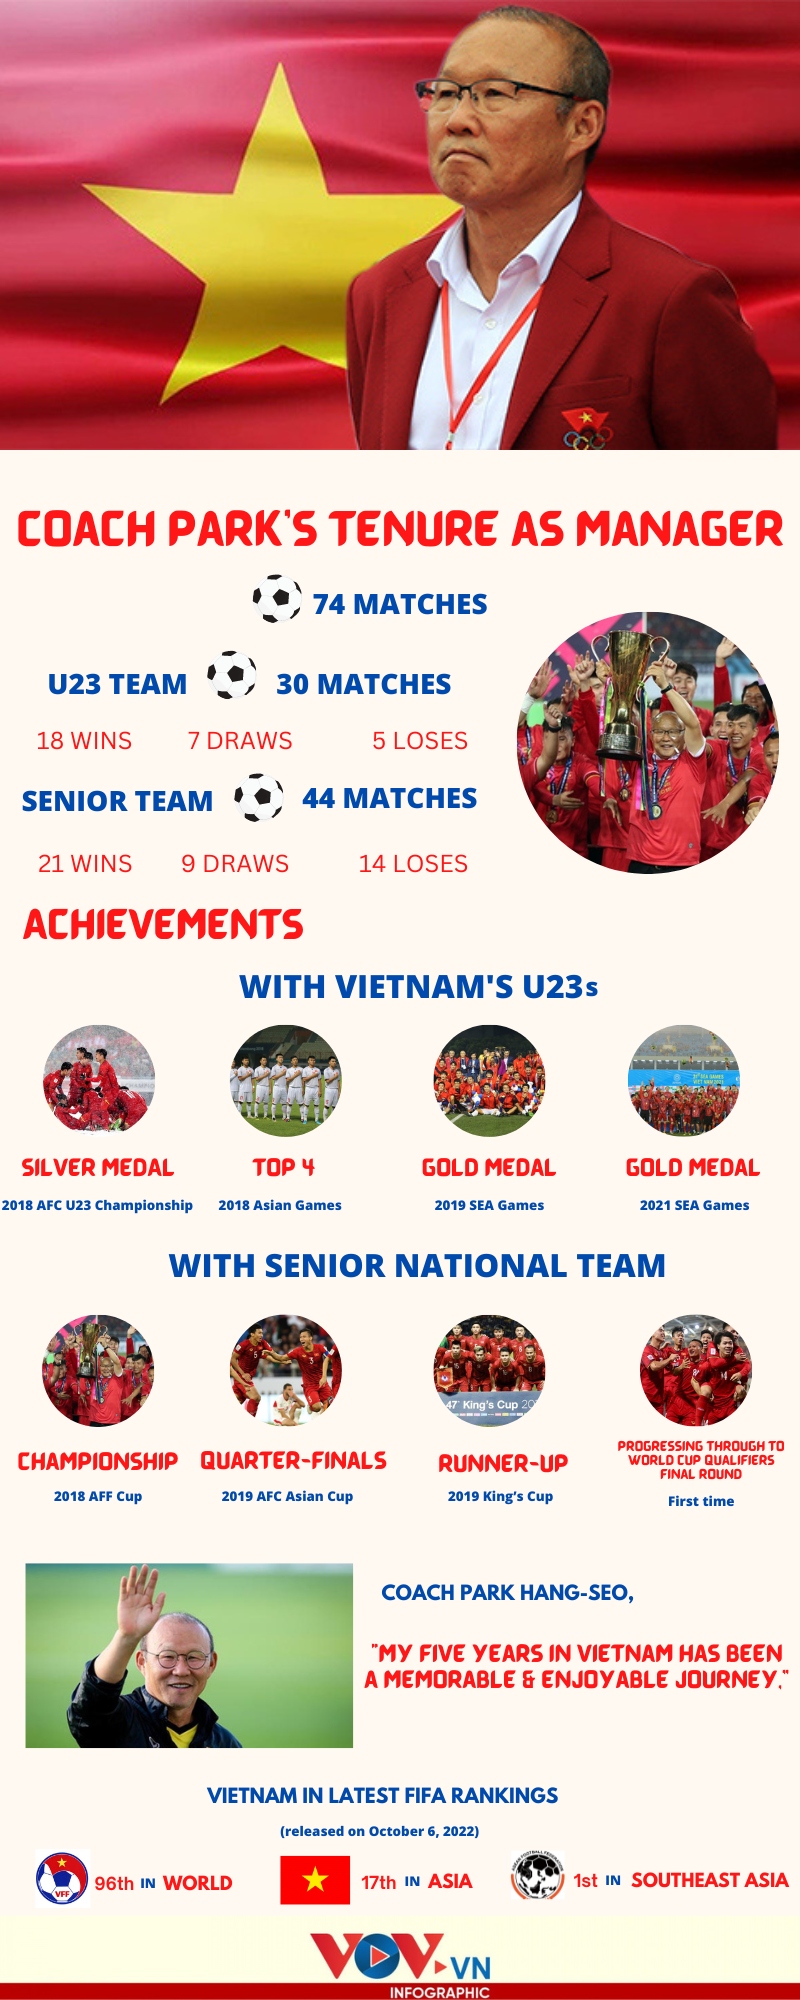 park hang-seo s five-year journey with vietnamese football picture 1